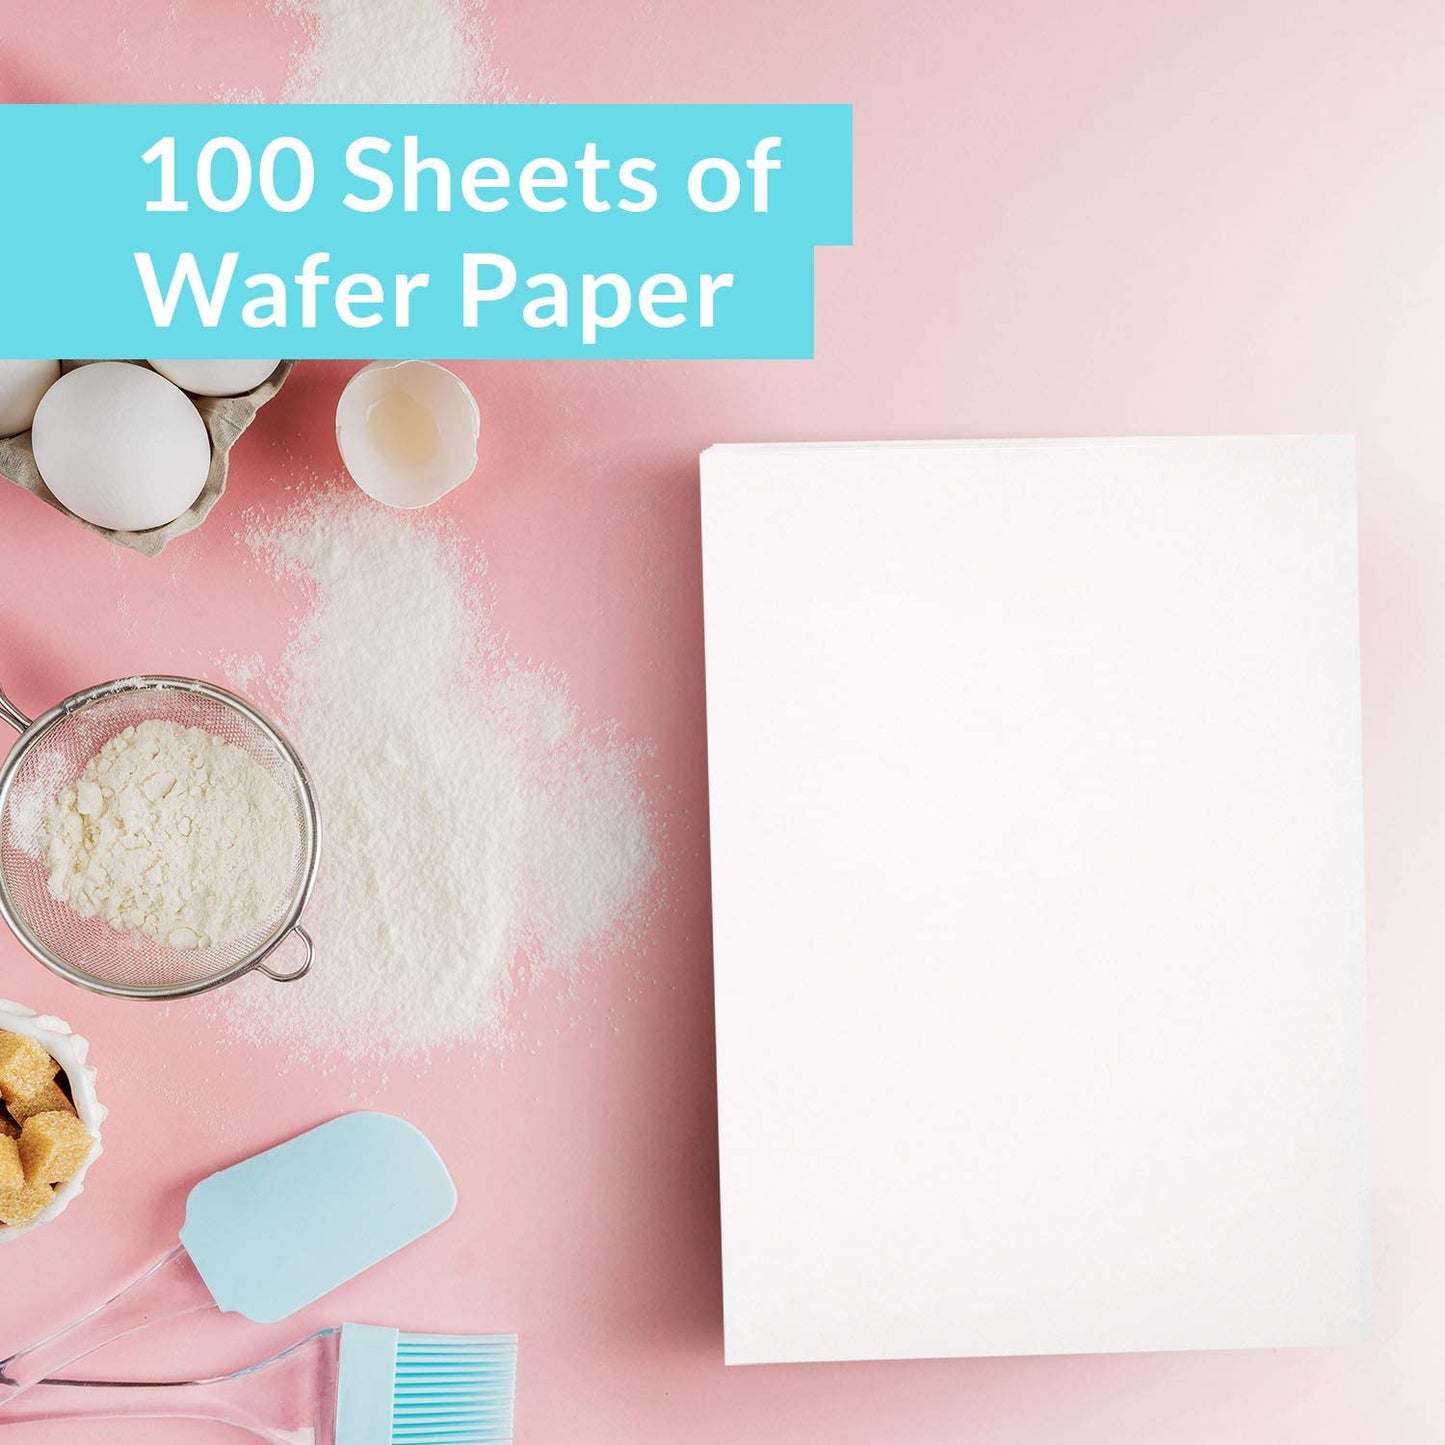 50 pound note edible wafer paper or icing sheet